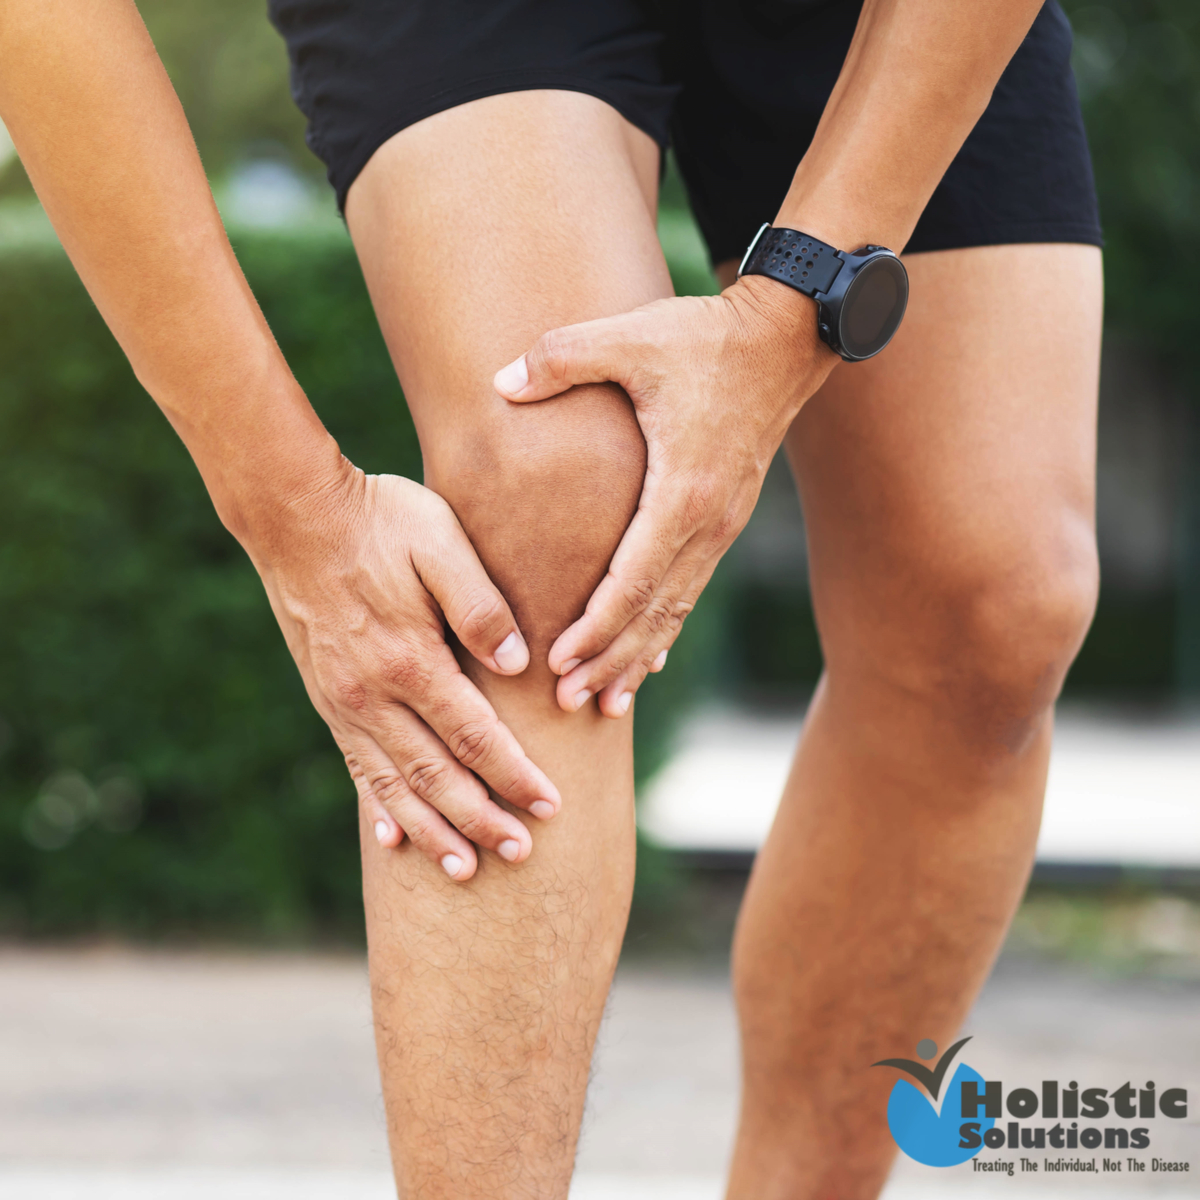 Regenerate And Heal With Prolotherapy For Knee Injuries Near Irvine